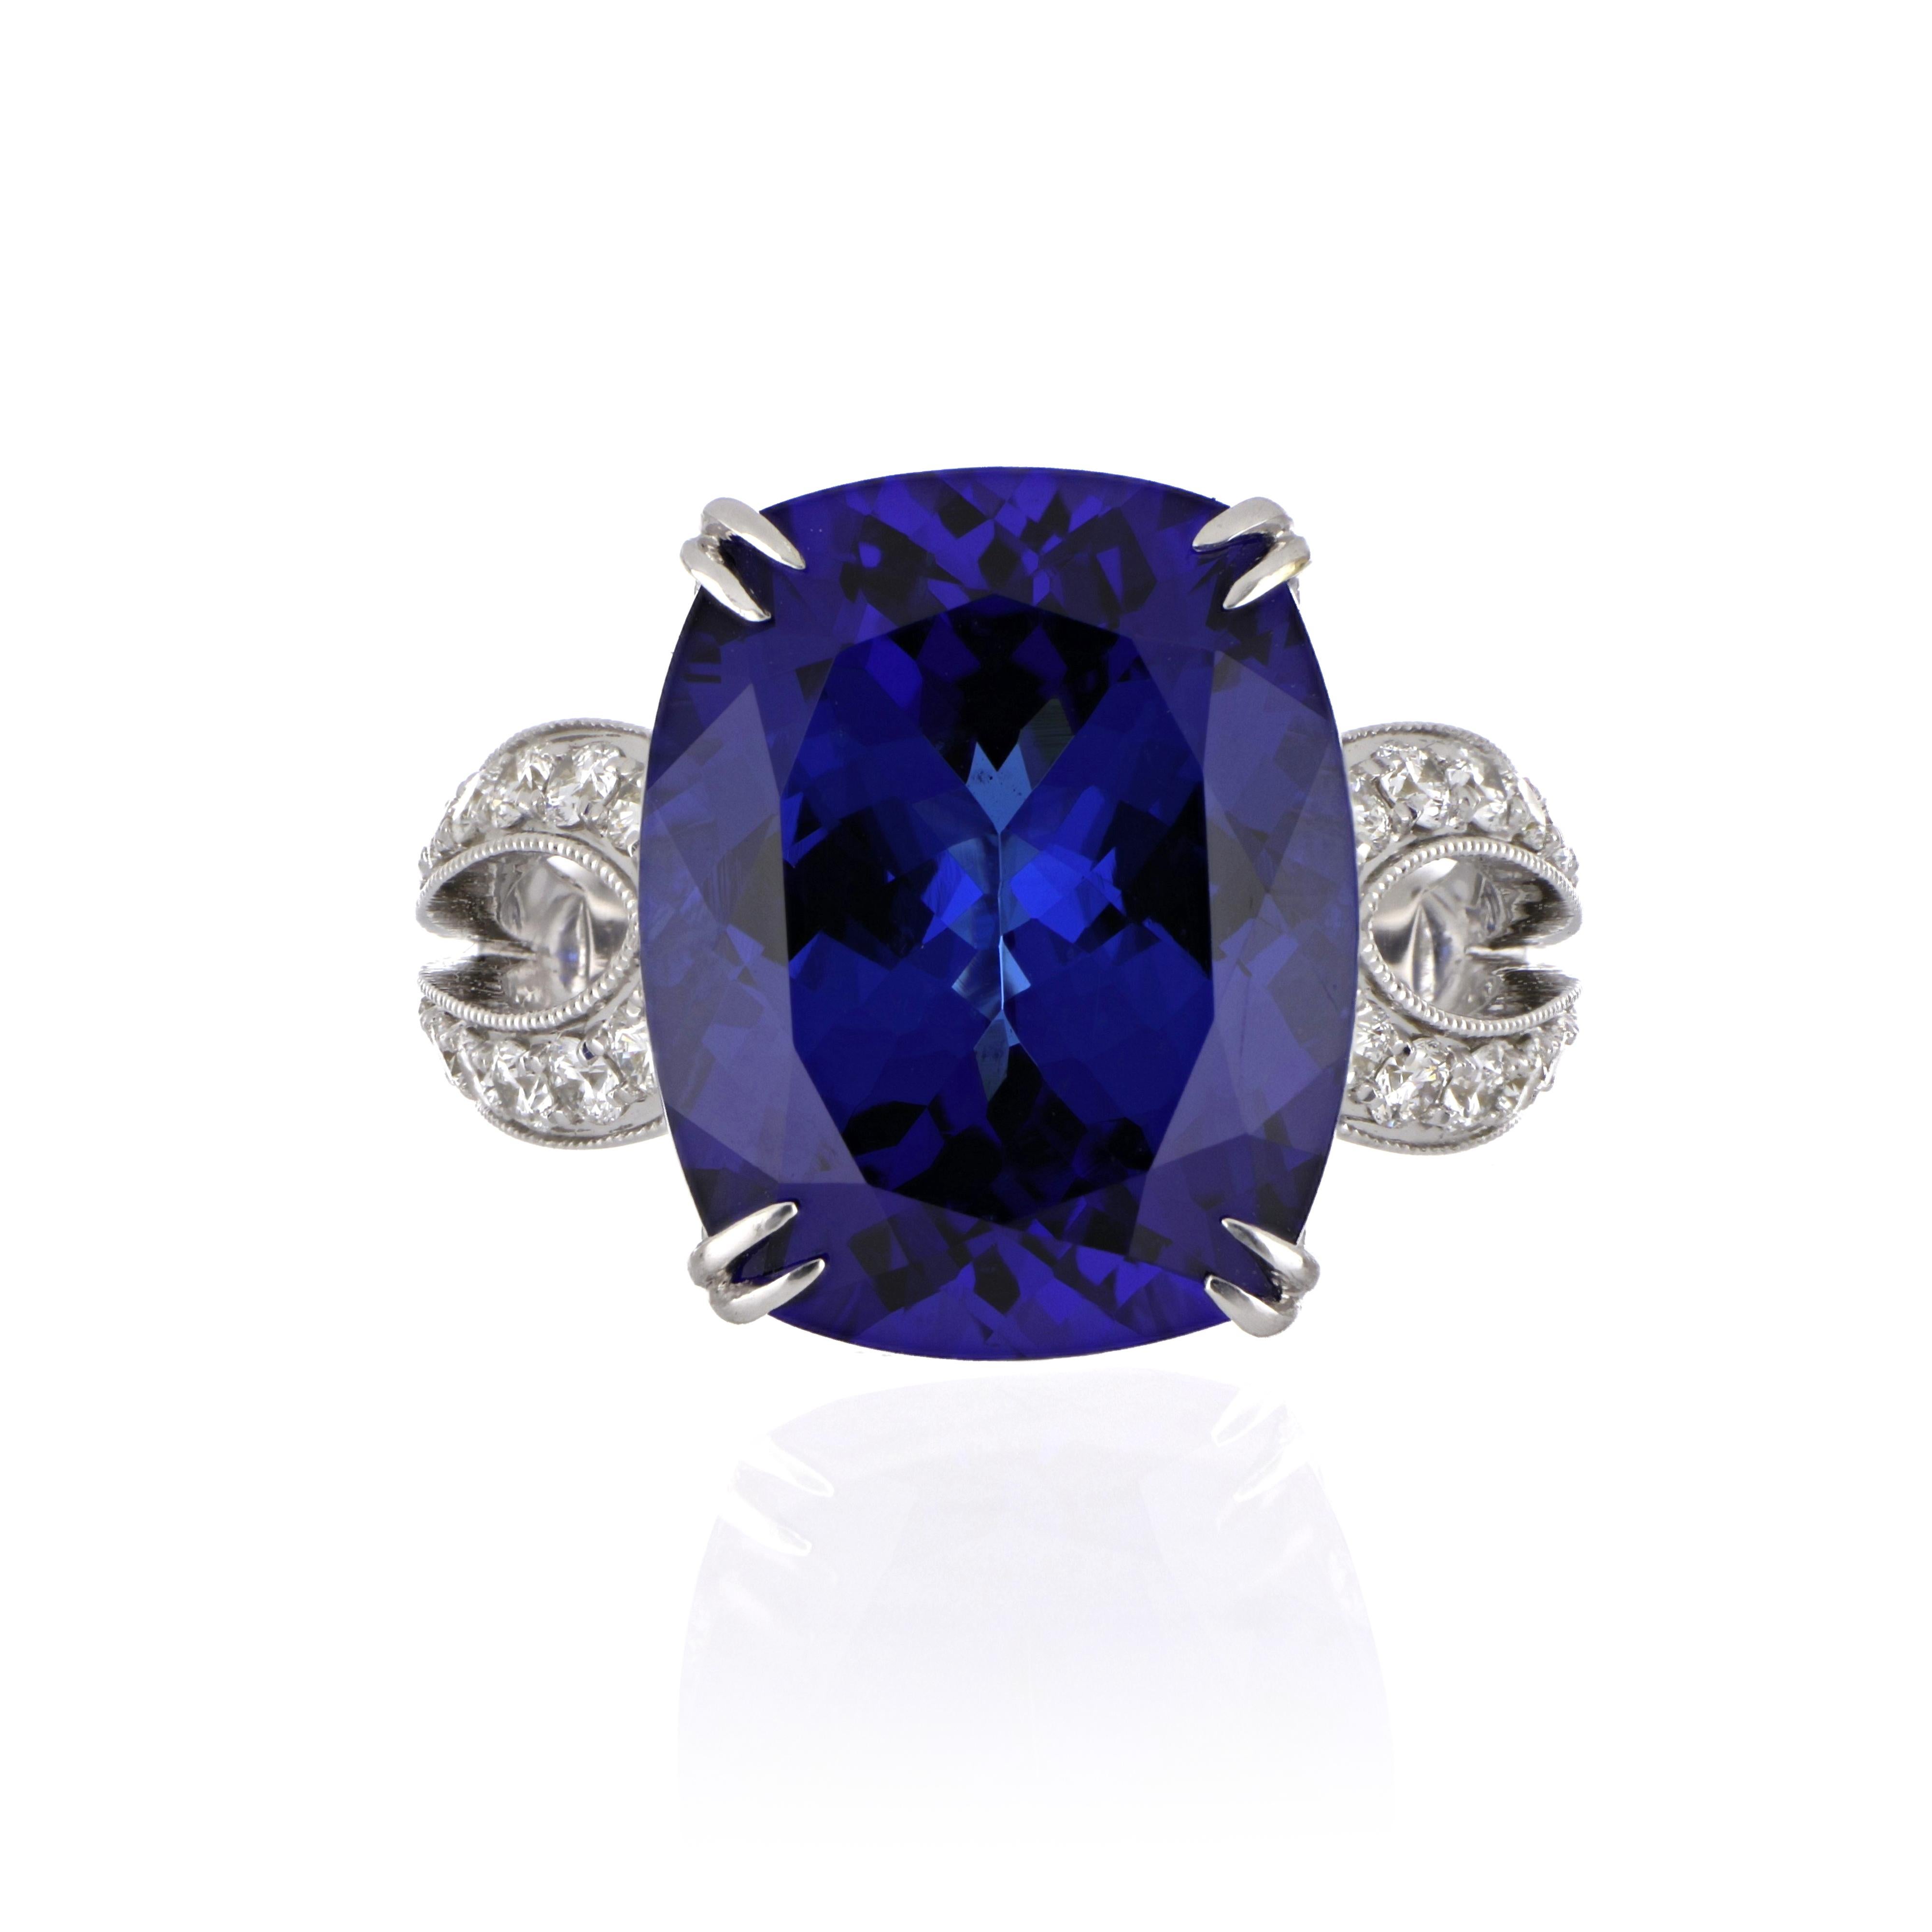 Elegant and exquisitely detailed 18K Ring, centre set with 13.67 Ct Tanzanite, surrounded by and enhanced on shank with micro pave Diamonds, weighing approx. 1.05 total carat weight. Beautifully Hand crafted in 18 Karat white Gold.

Stone Size: